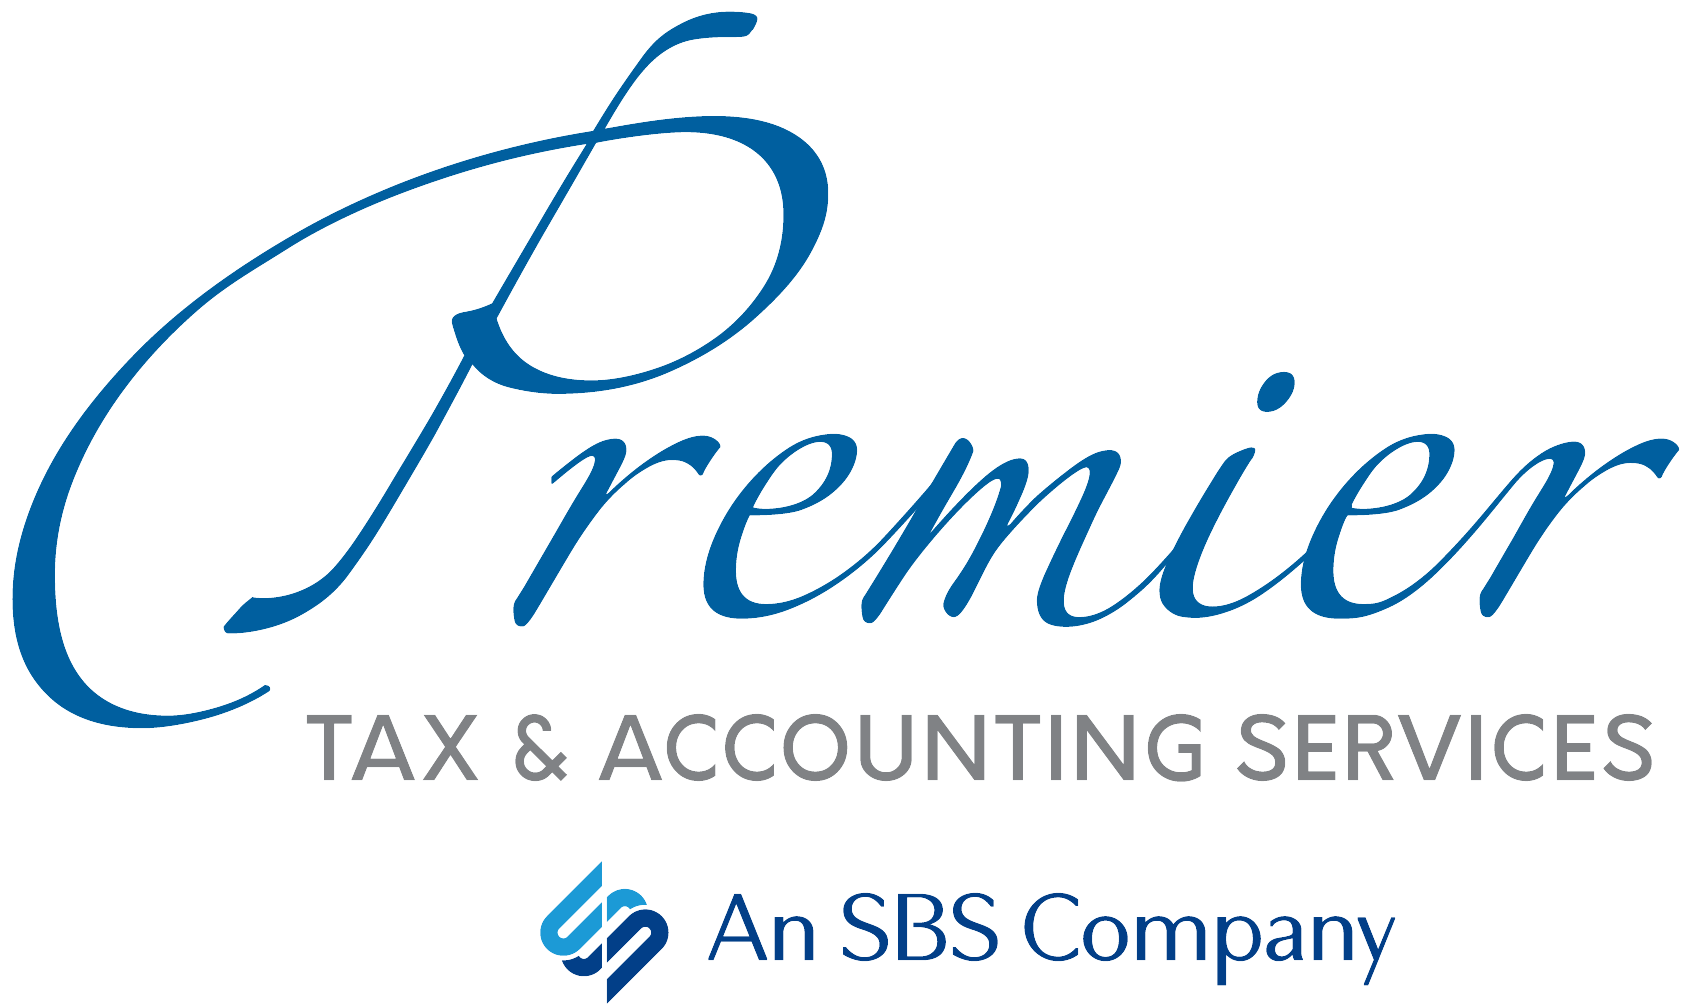 Premier Tax & Accounting Services Logo